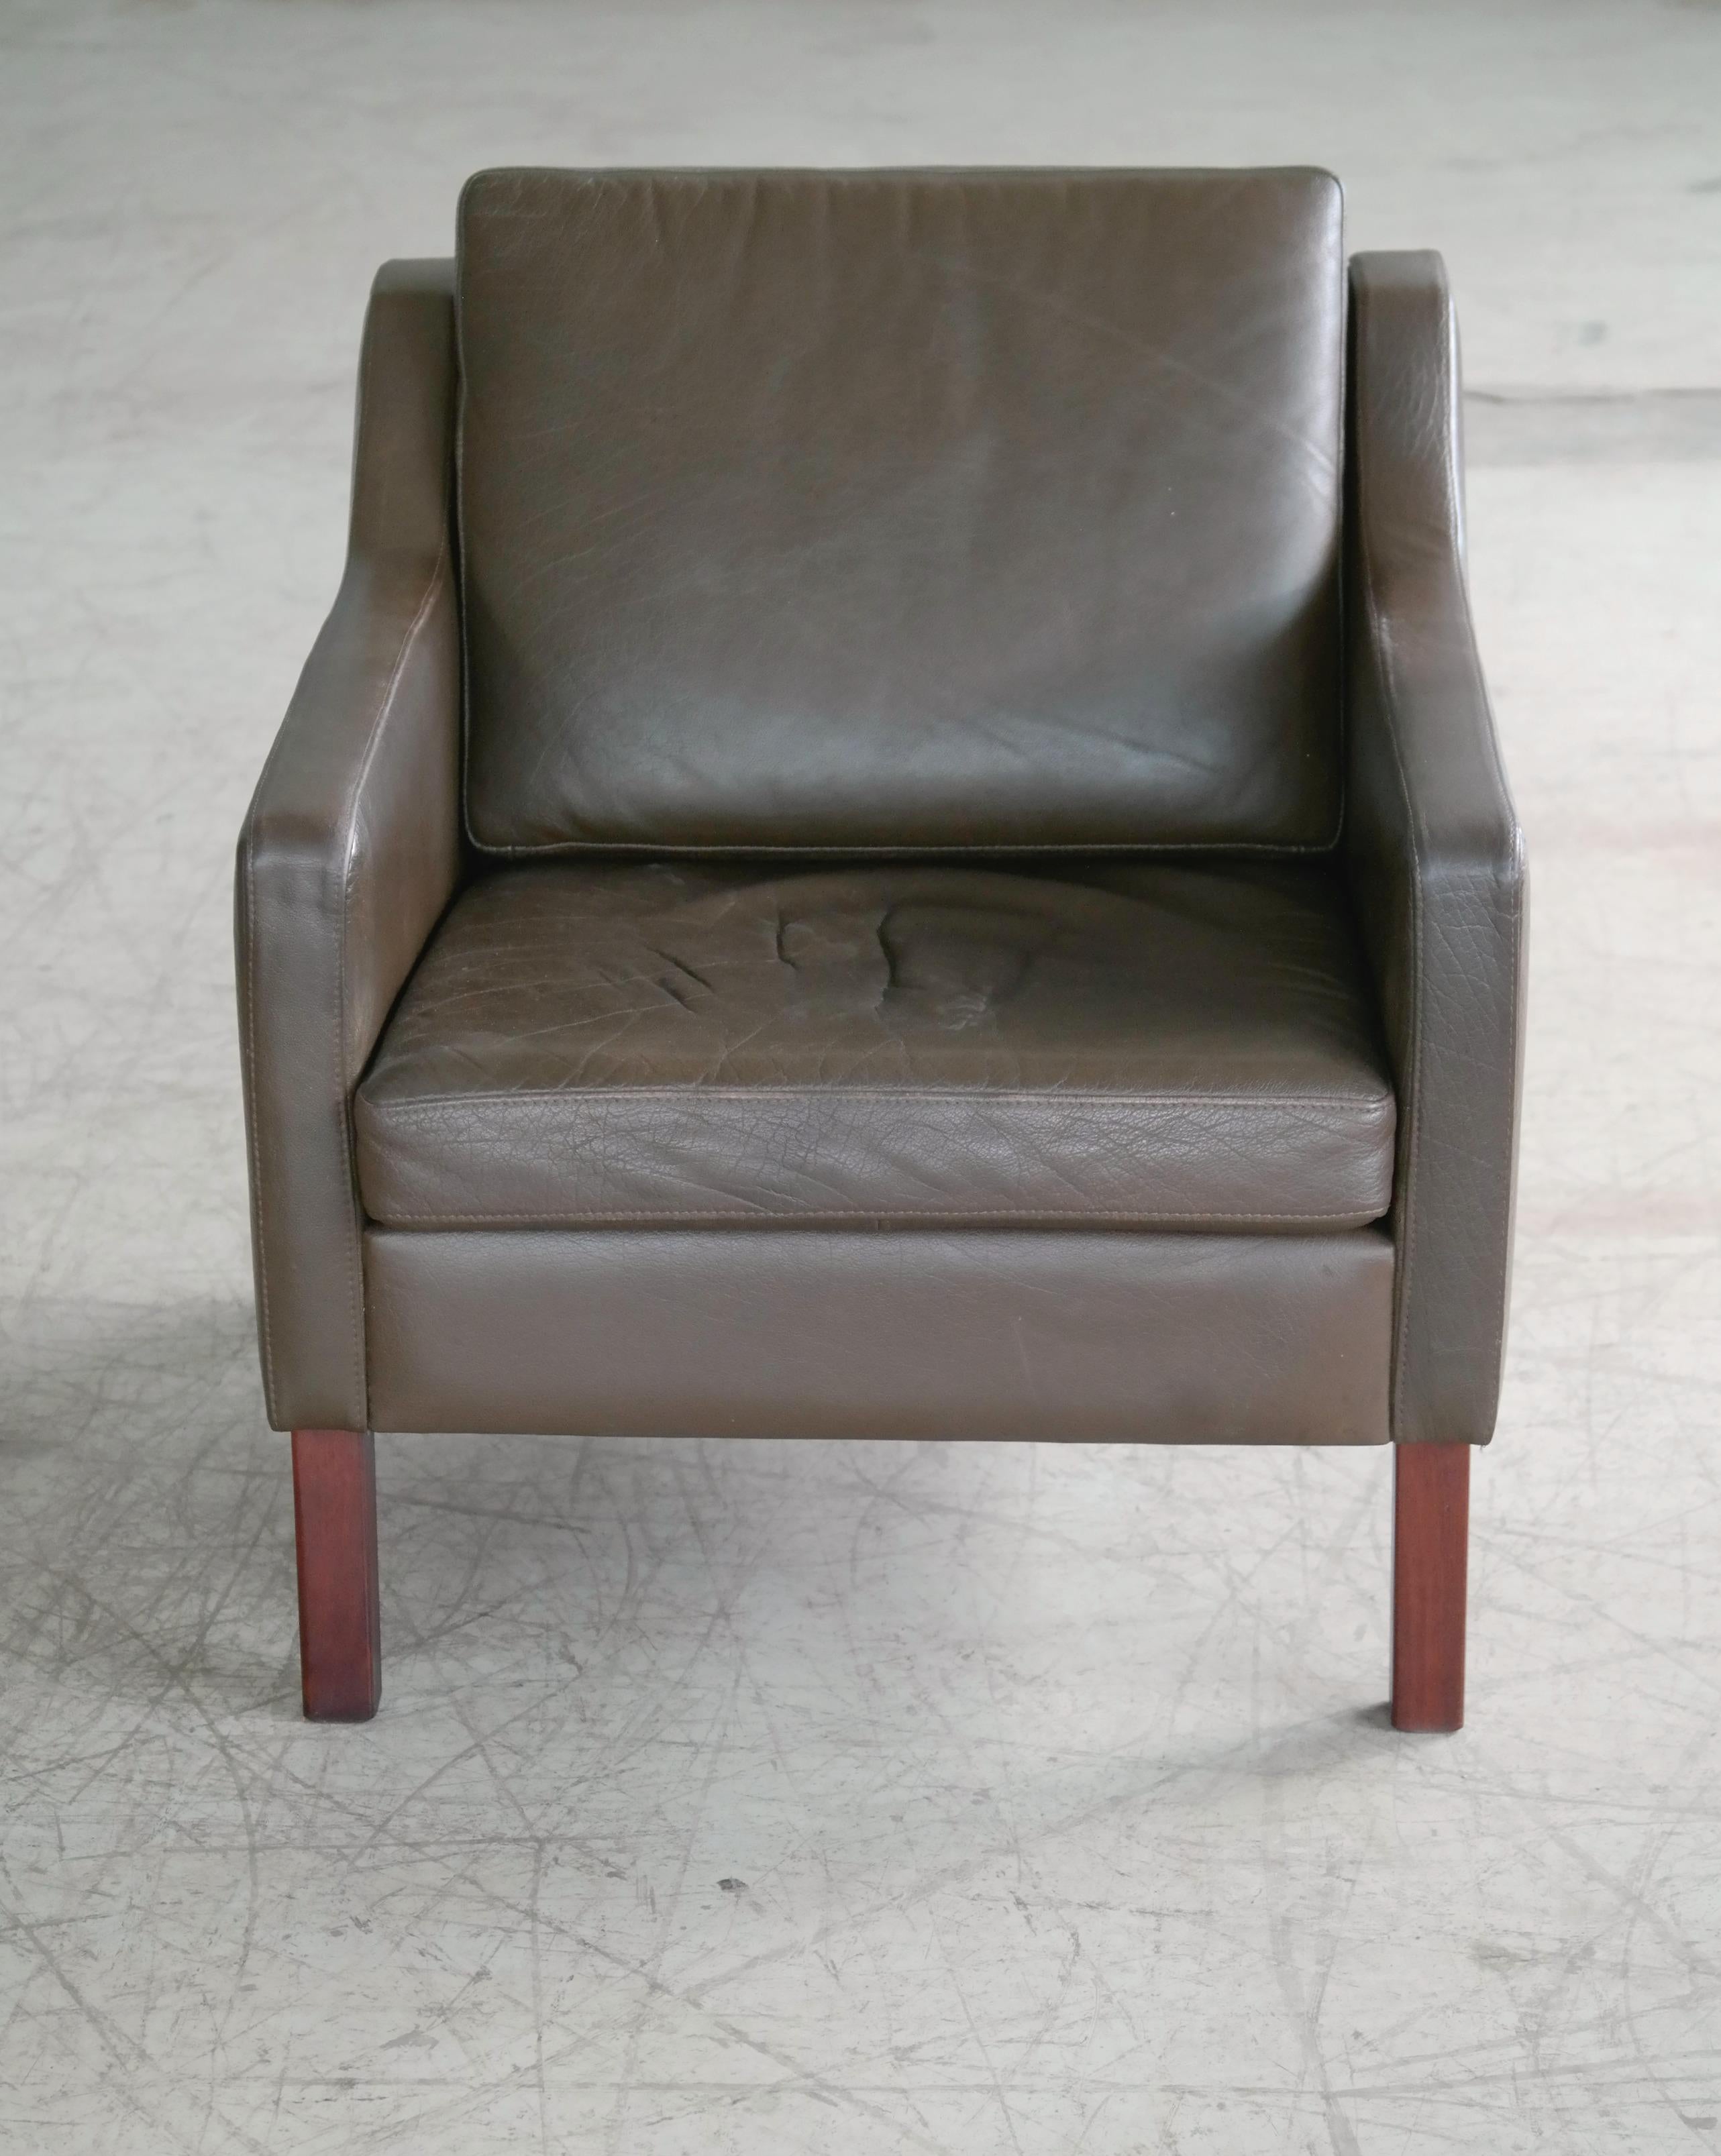 Mogen Hansen produced version of Børge Mogensen's lounge chair model 2421 one of the most elegant classic midcentury Danish lounge chairs ever made and a design that will just never go out of style. Luxurious top grain buffalo leather in a nice dark